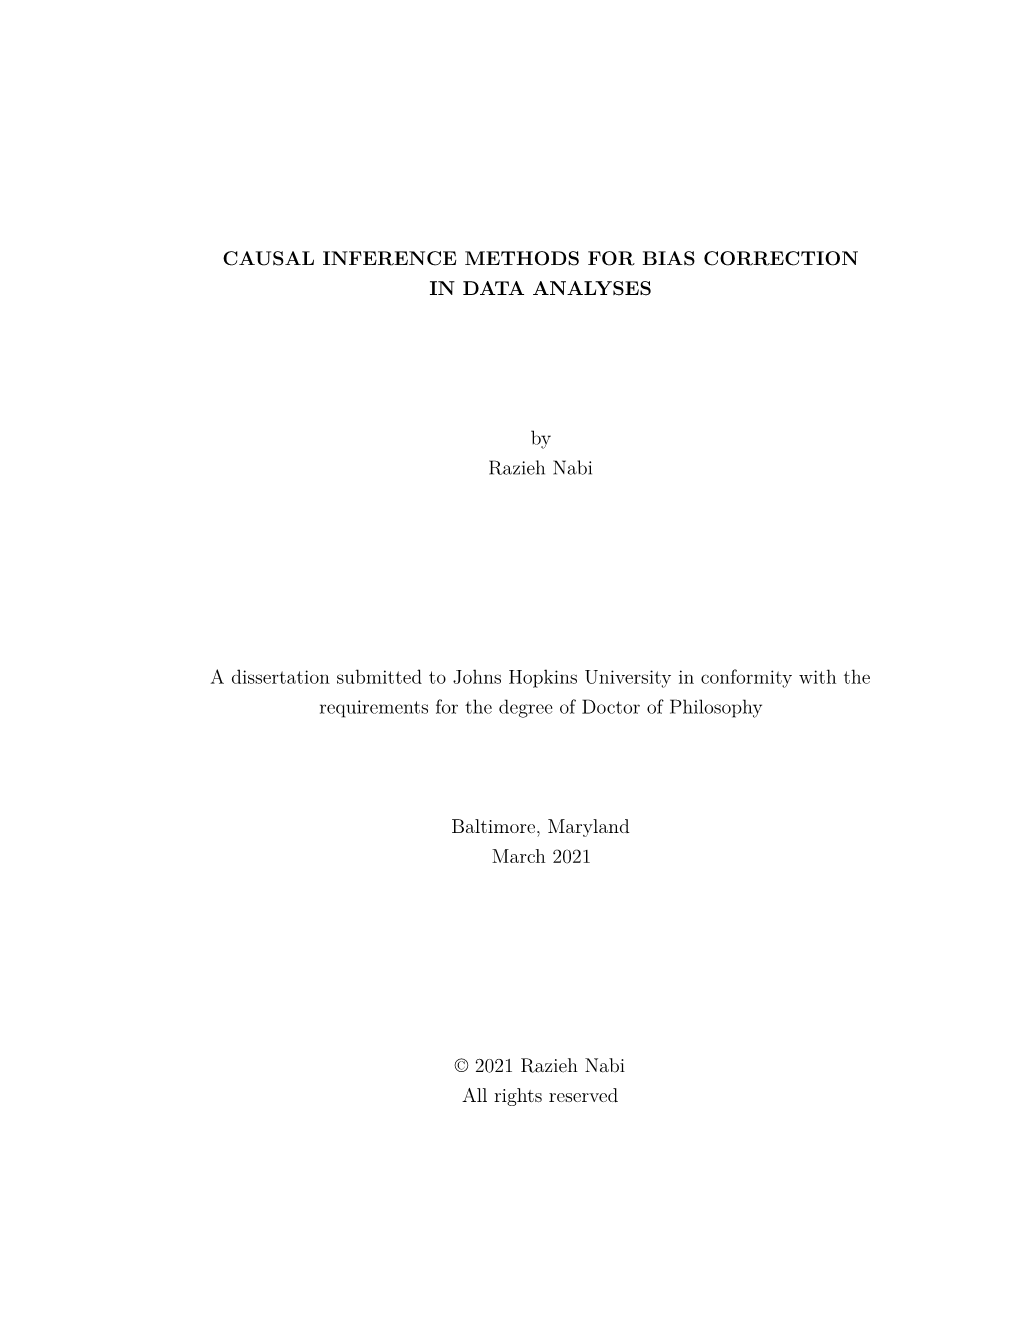 Causal Inference Methods for Bias Correction in Data Analyses